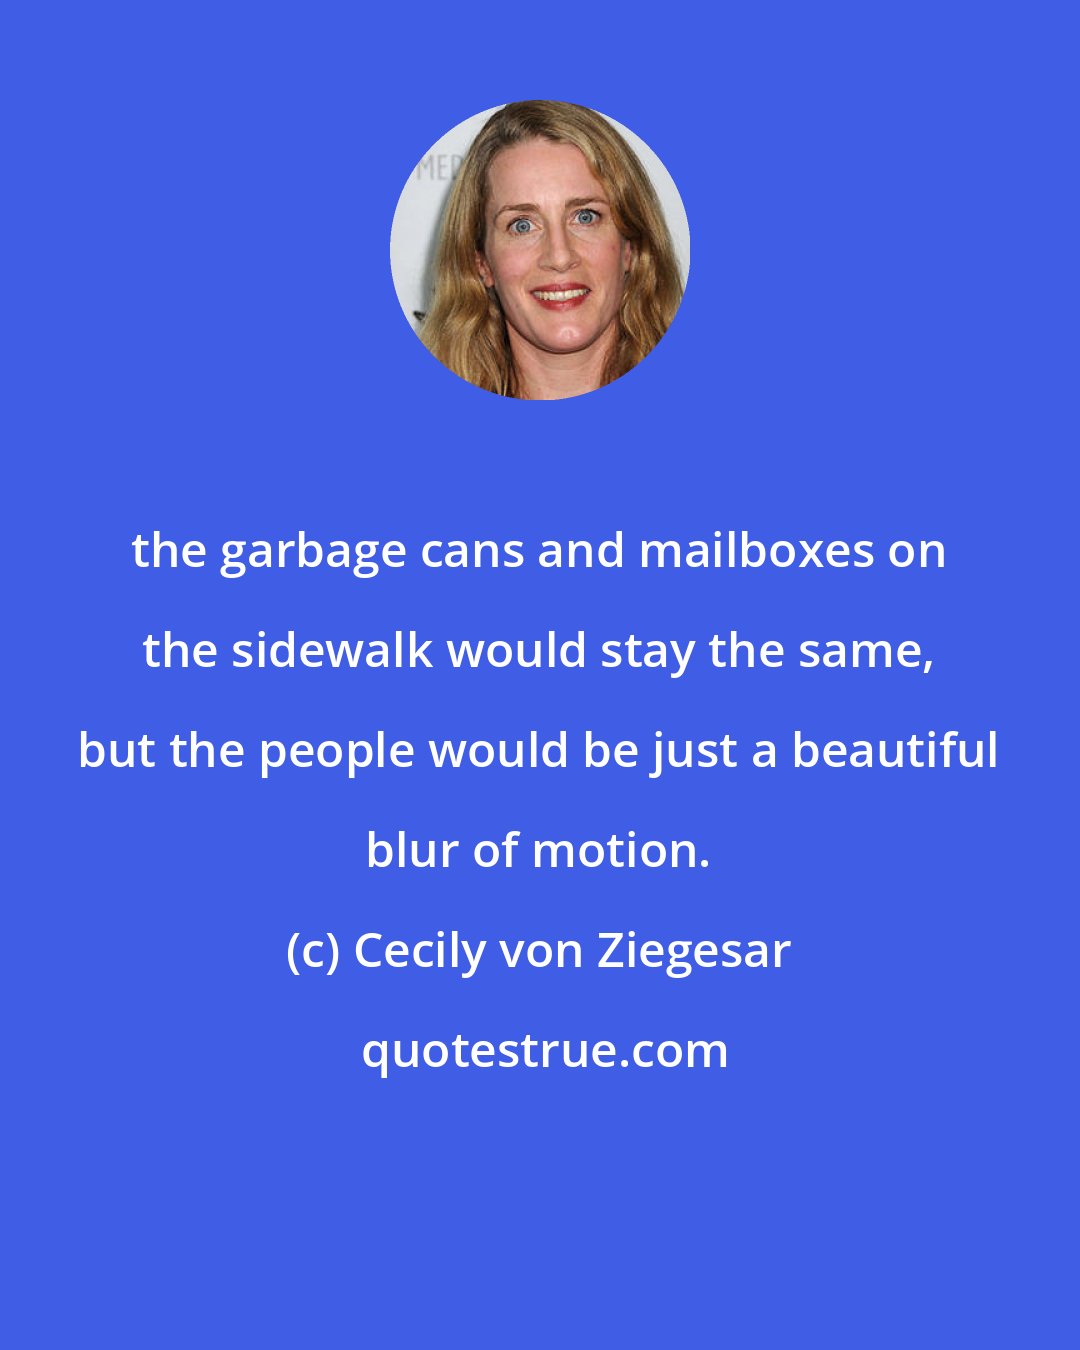 Cecily von Ziegesar: the garbage cans and mailboxes on the sidewalk would stay the same, but the people would be just a beautiful blur of motion.